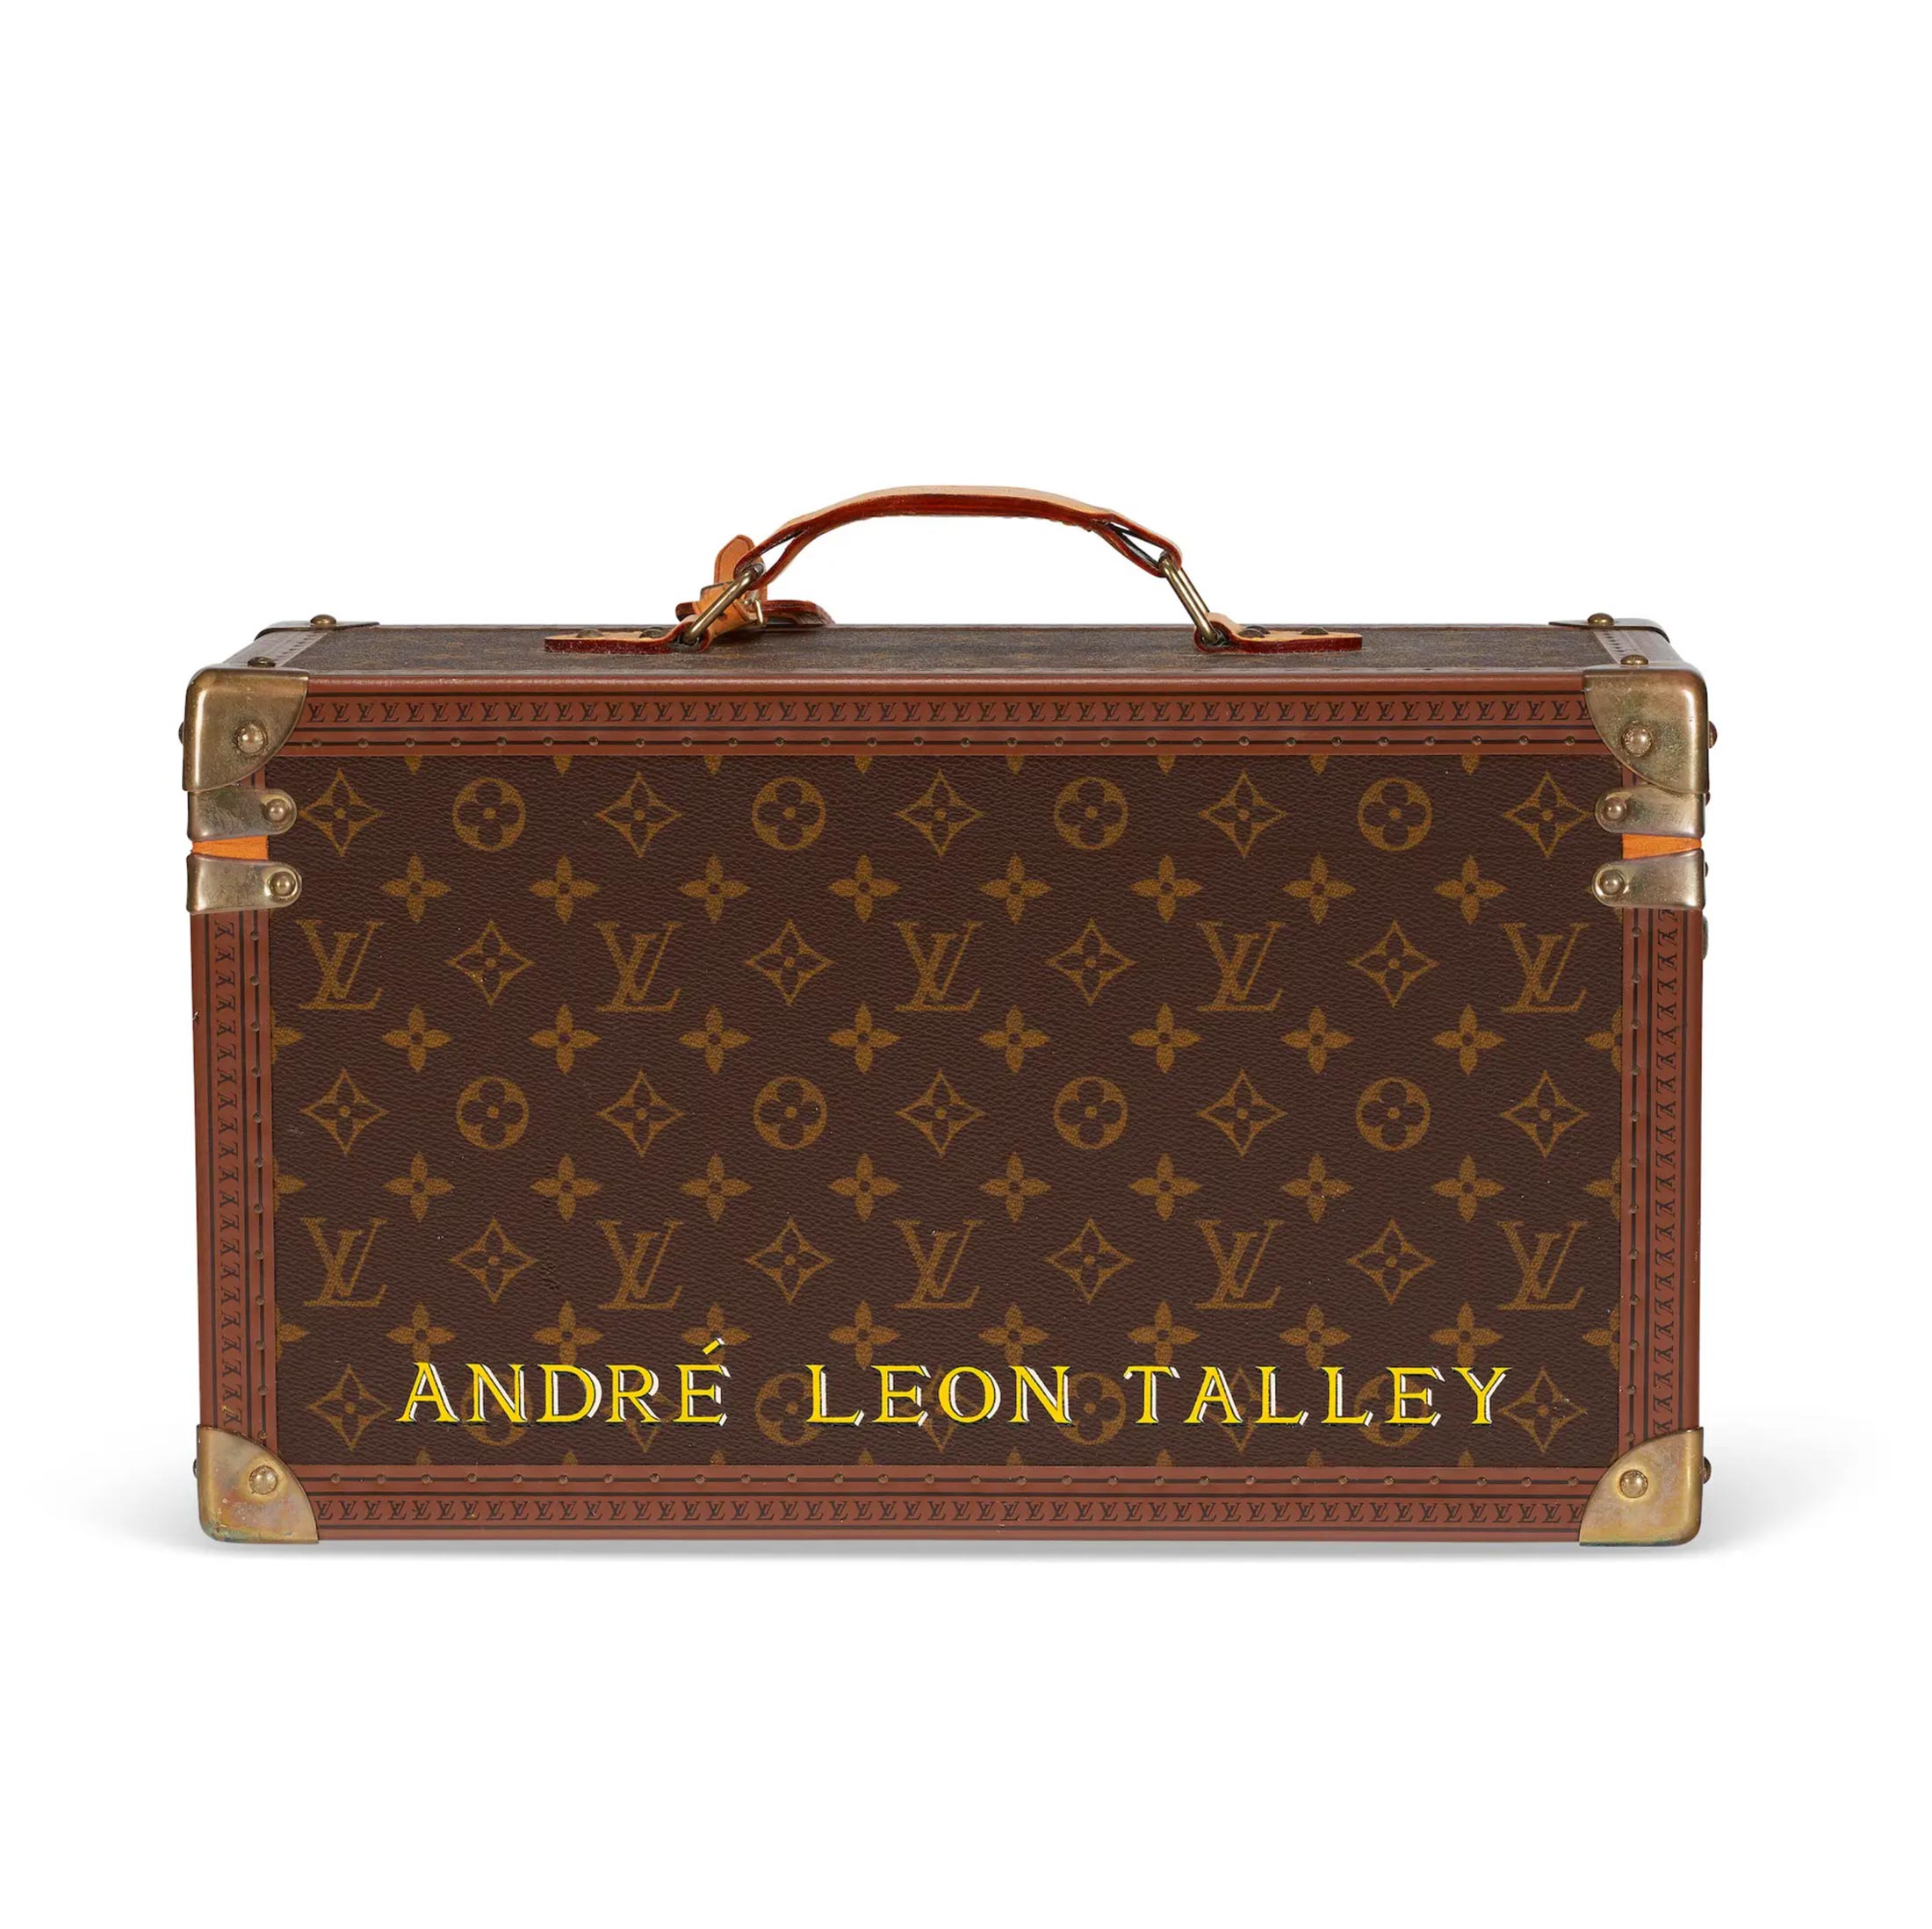 Set of two: a personalised brown monogram canvas hardsided train case and a brown monogram canvas hardsided train case, Louis Vuitton, around 2007 - Courtesy Christie's